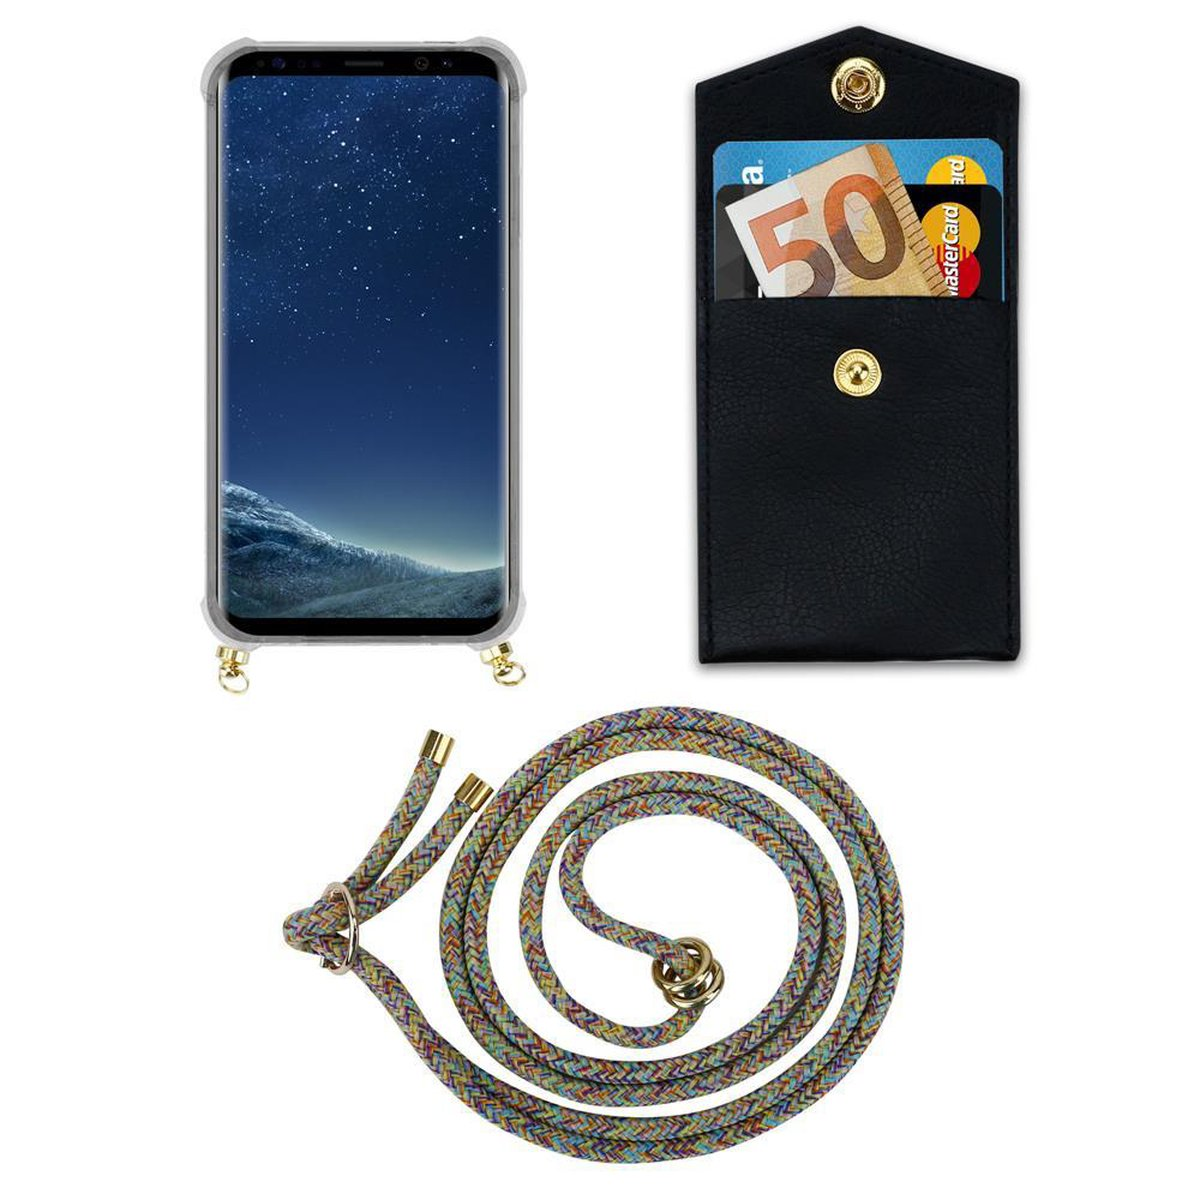 Ringen, CADORABO Handy abnehmbarer Kordel Backcover, Galaxy und Samsung, S8, Hülle, Band mit Kette RAINBOW Gold